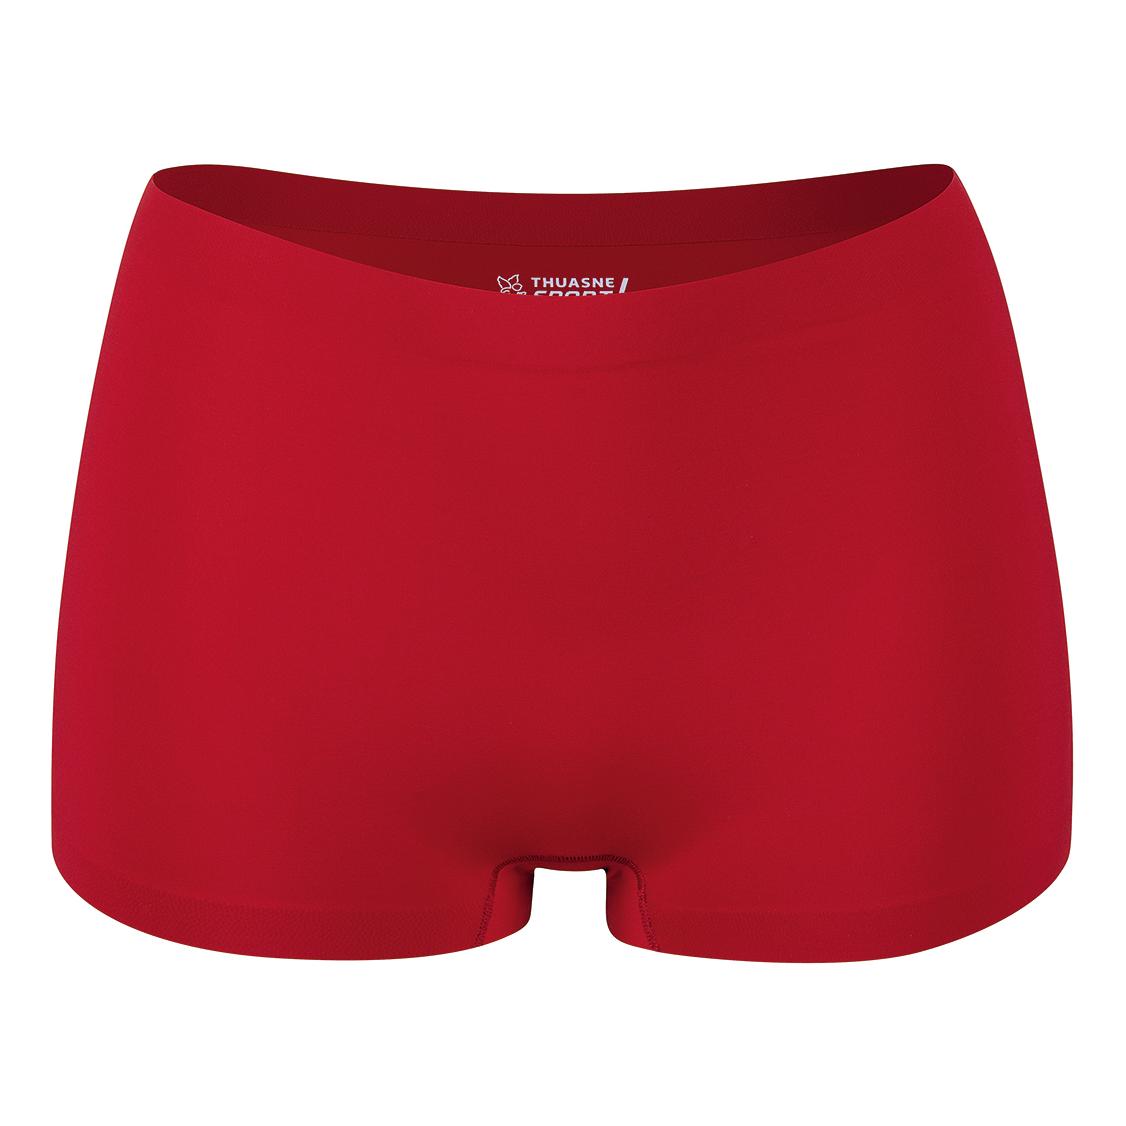 Thuasne Shorty ThermoSeam Rouge S 